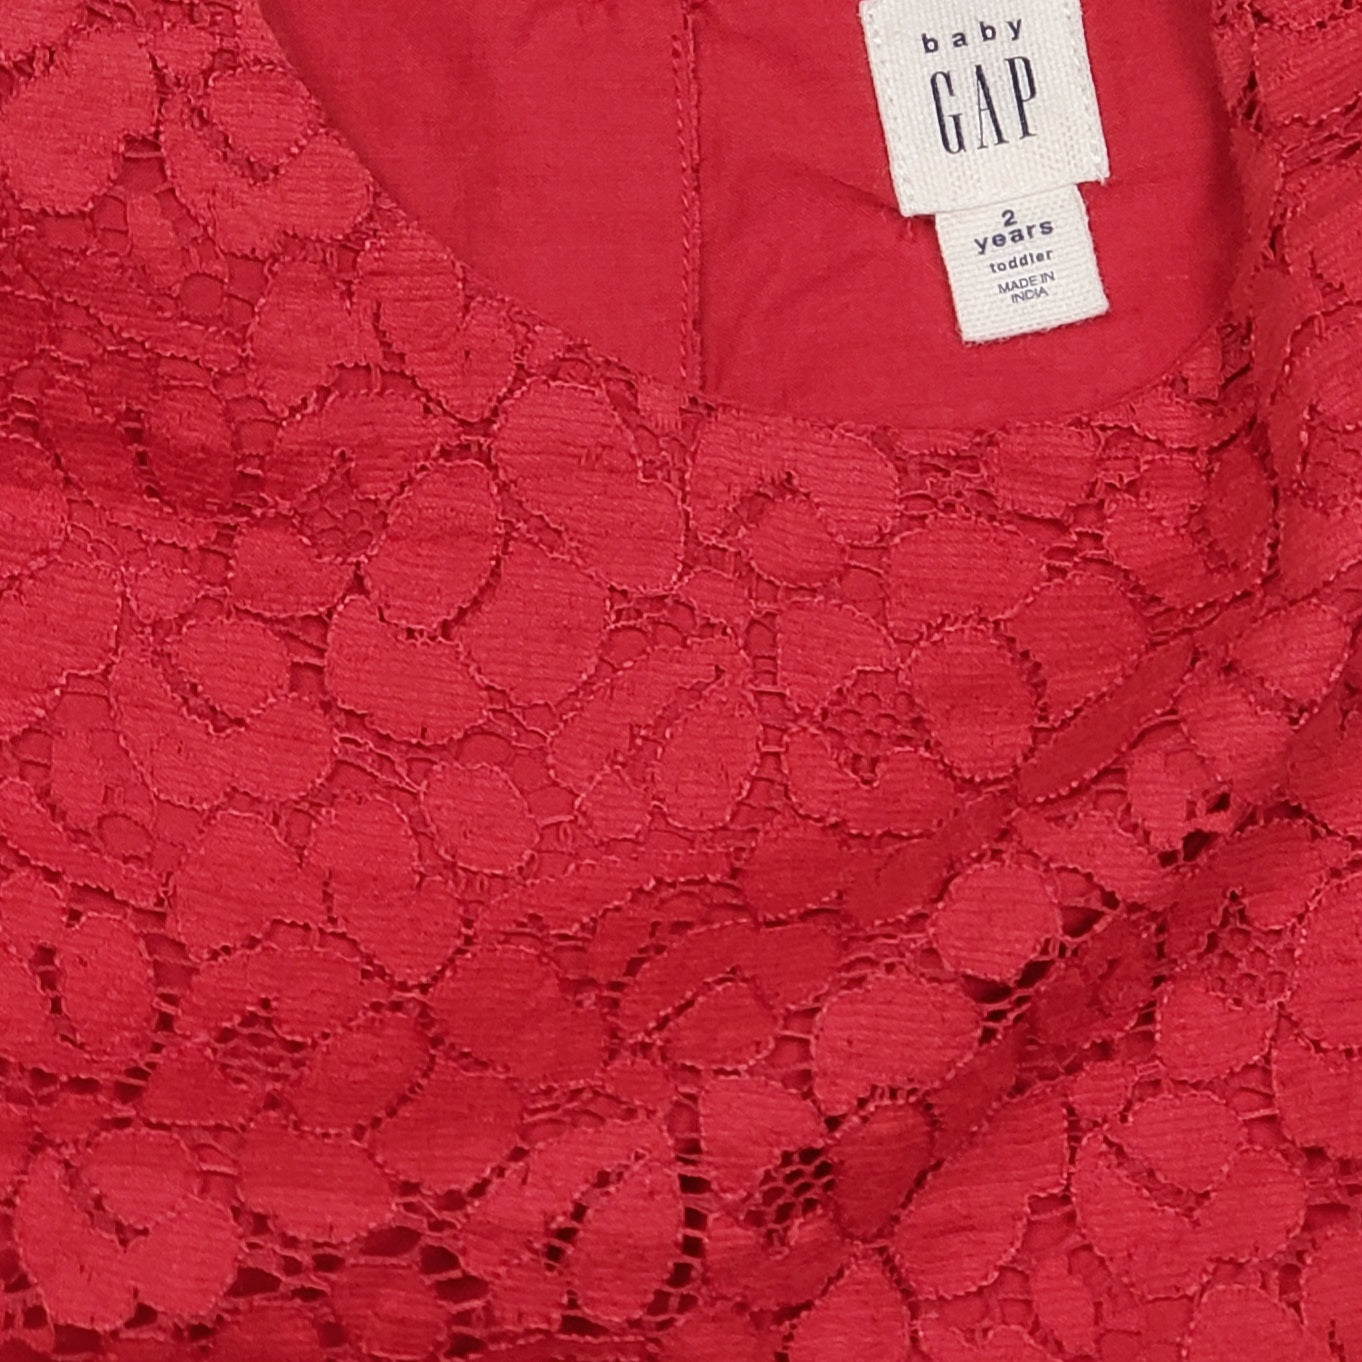 Baby Gap Girls Red Eyelet Floral Dress Size 2 Used, close-up